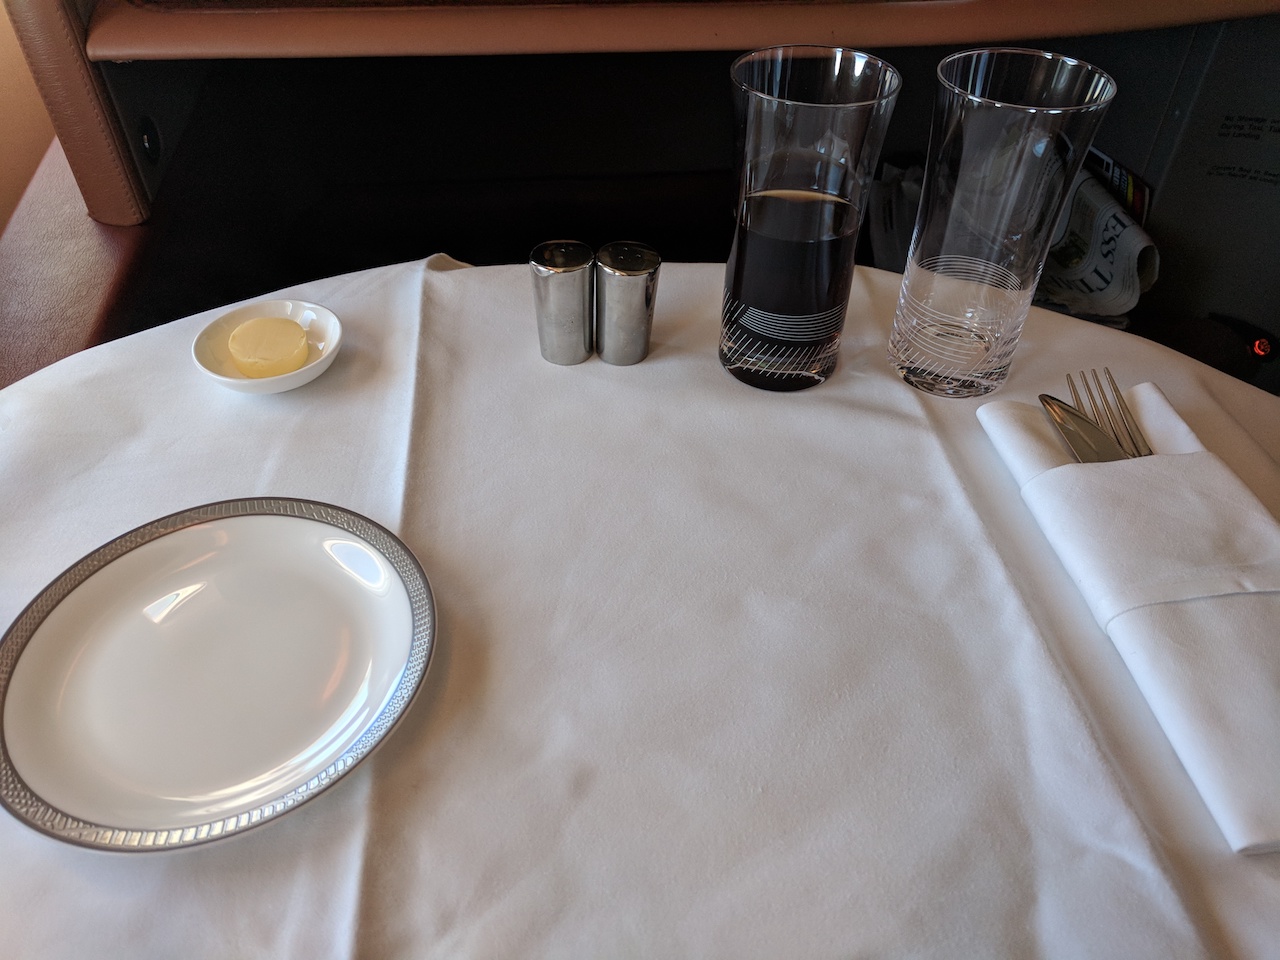 a table with a plate and glasses on it